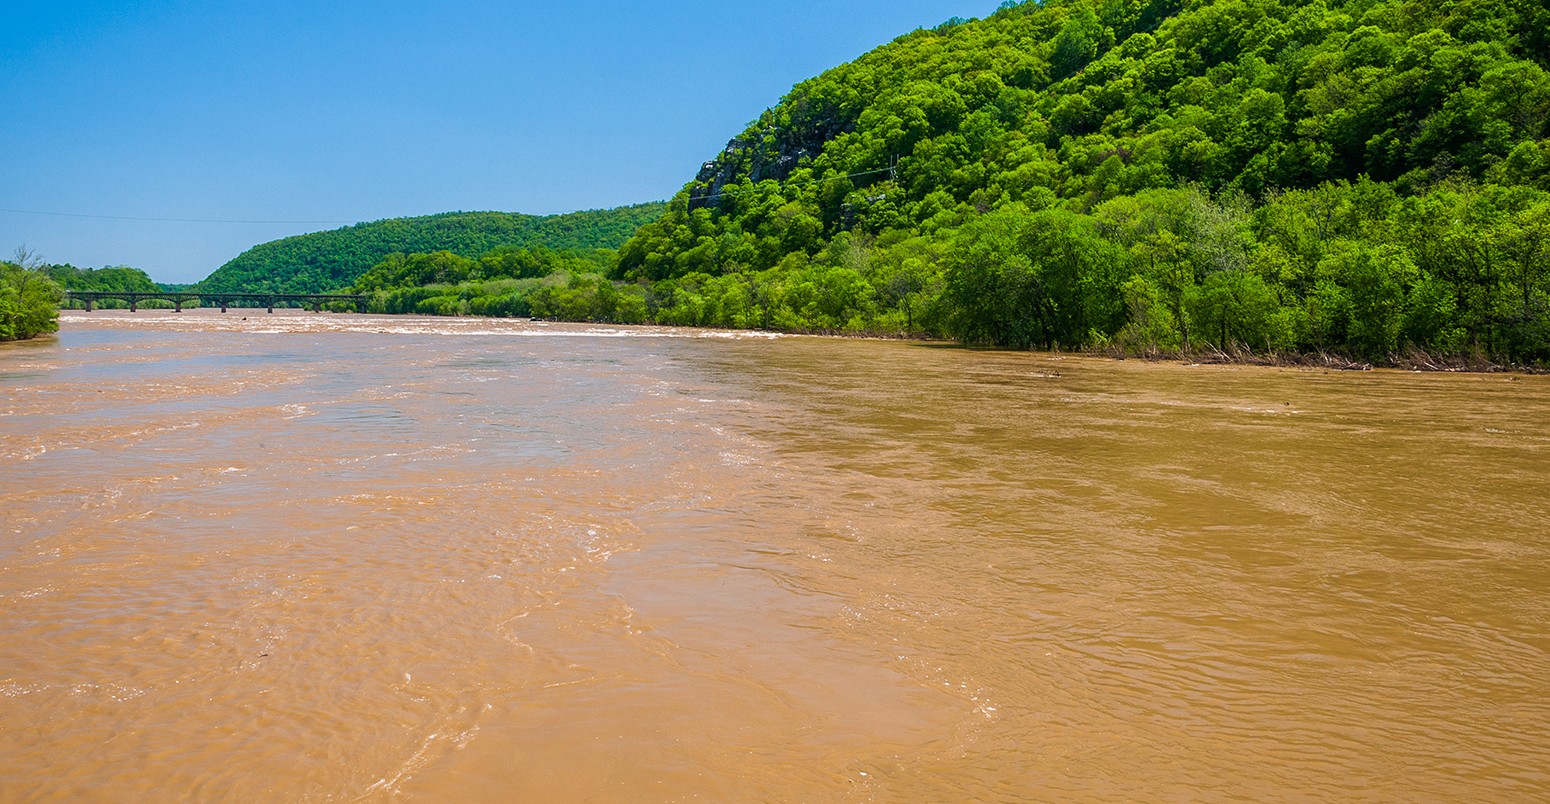 Spring flooding on the Potomac River in Harper's Ferry, West Virginia.